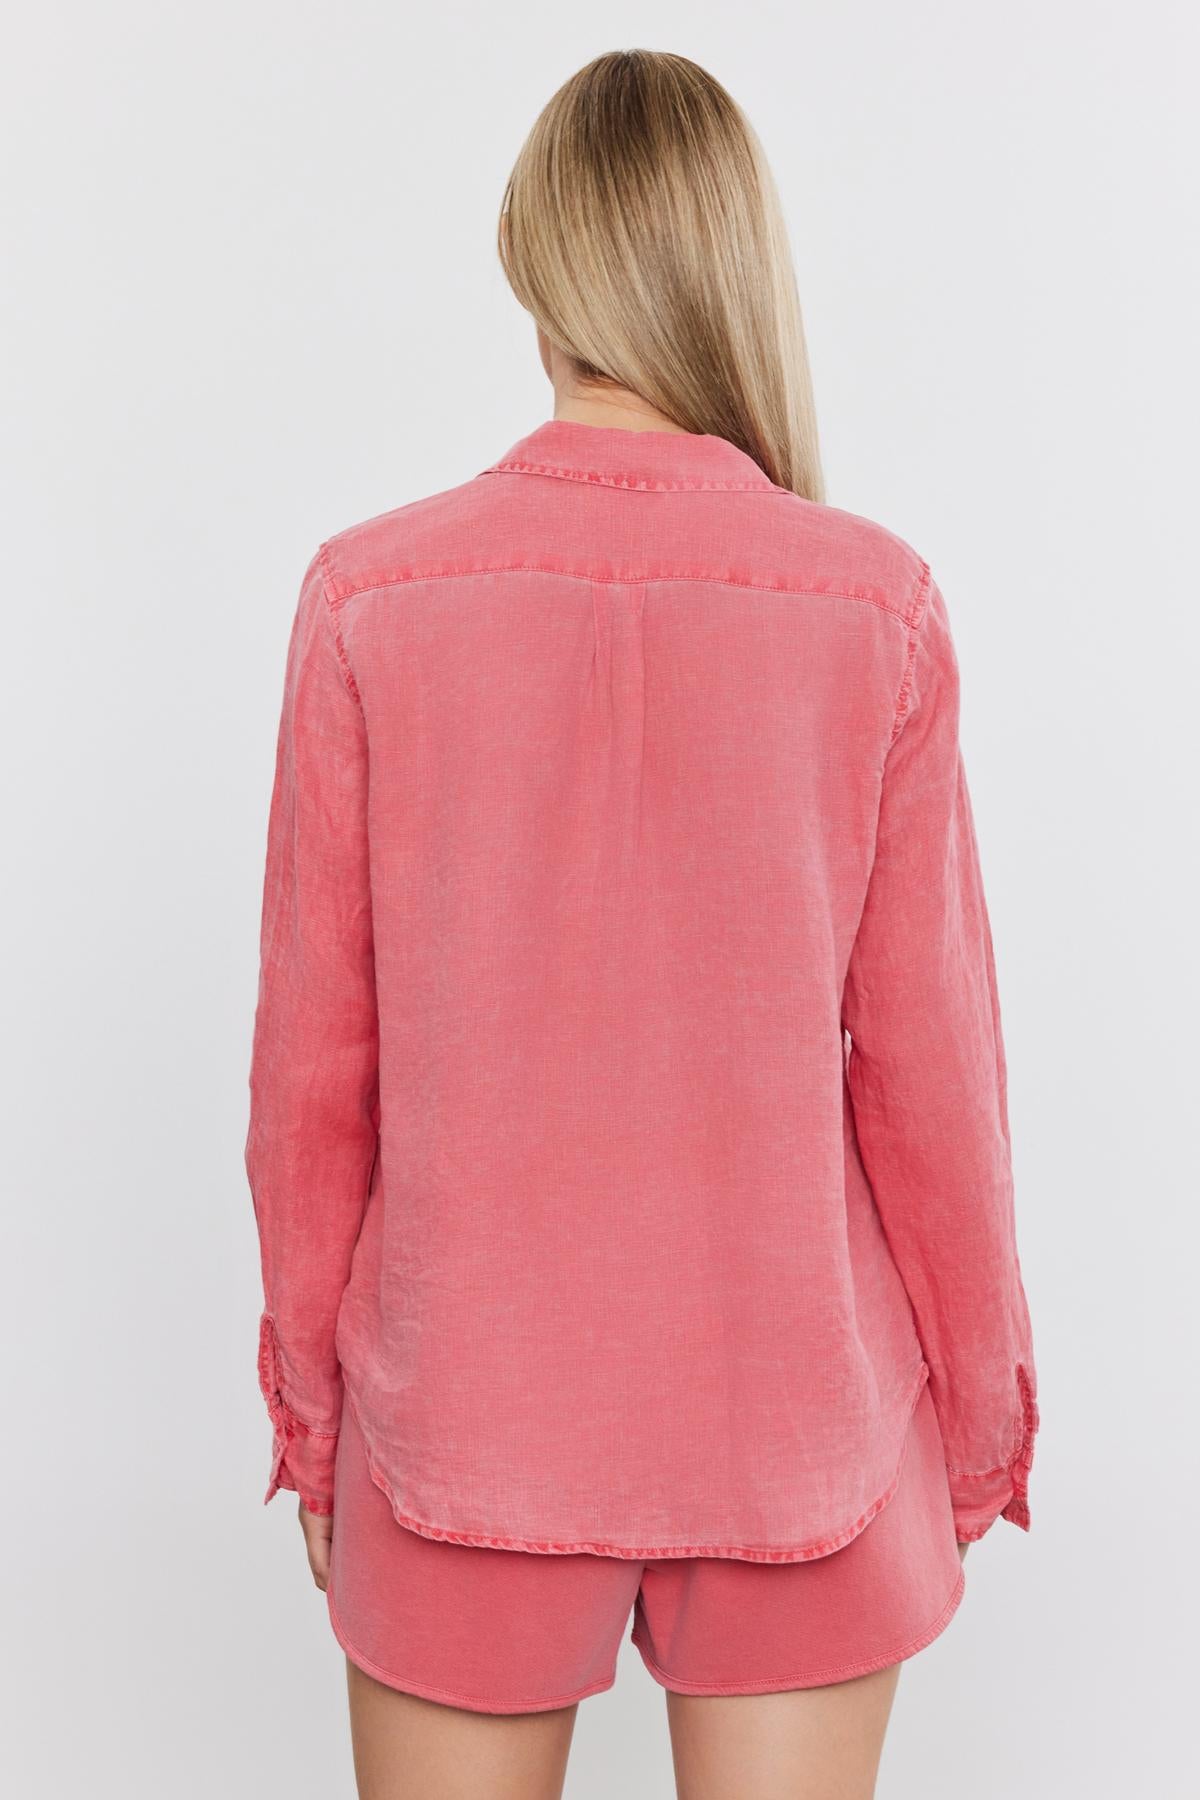 Rear view of a woman wearing a Velvet by Graham & Spencer NATALIA LINEN BUTTON-UP SHIRT and matching shorts, standing against a white background.-36910075805889